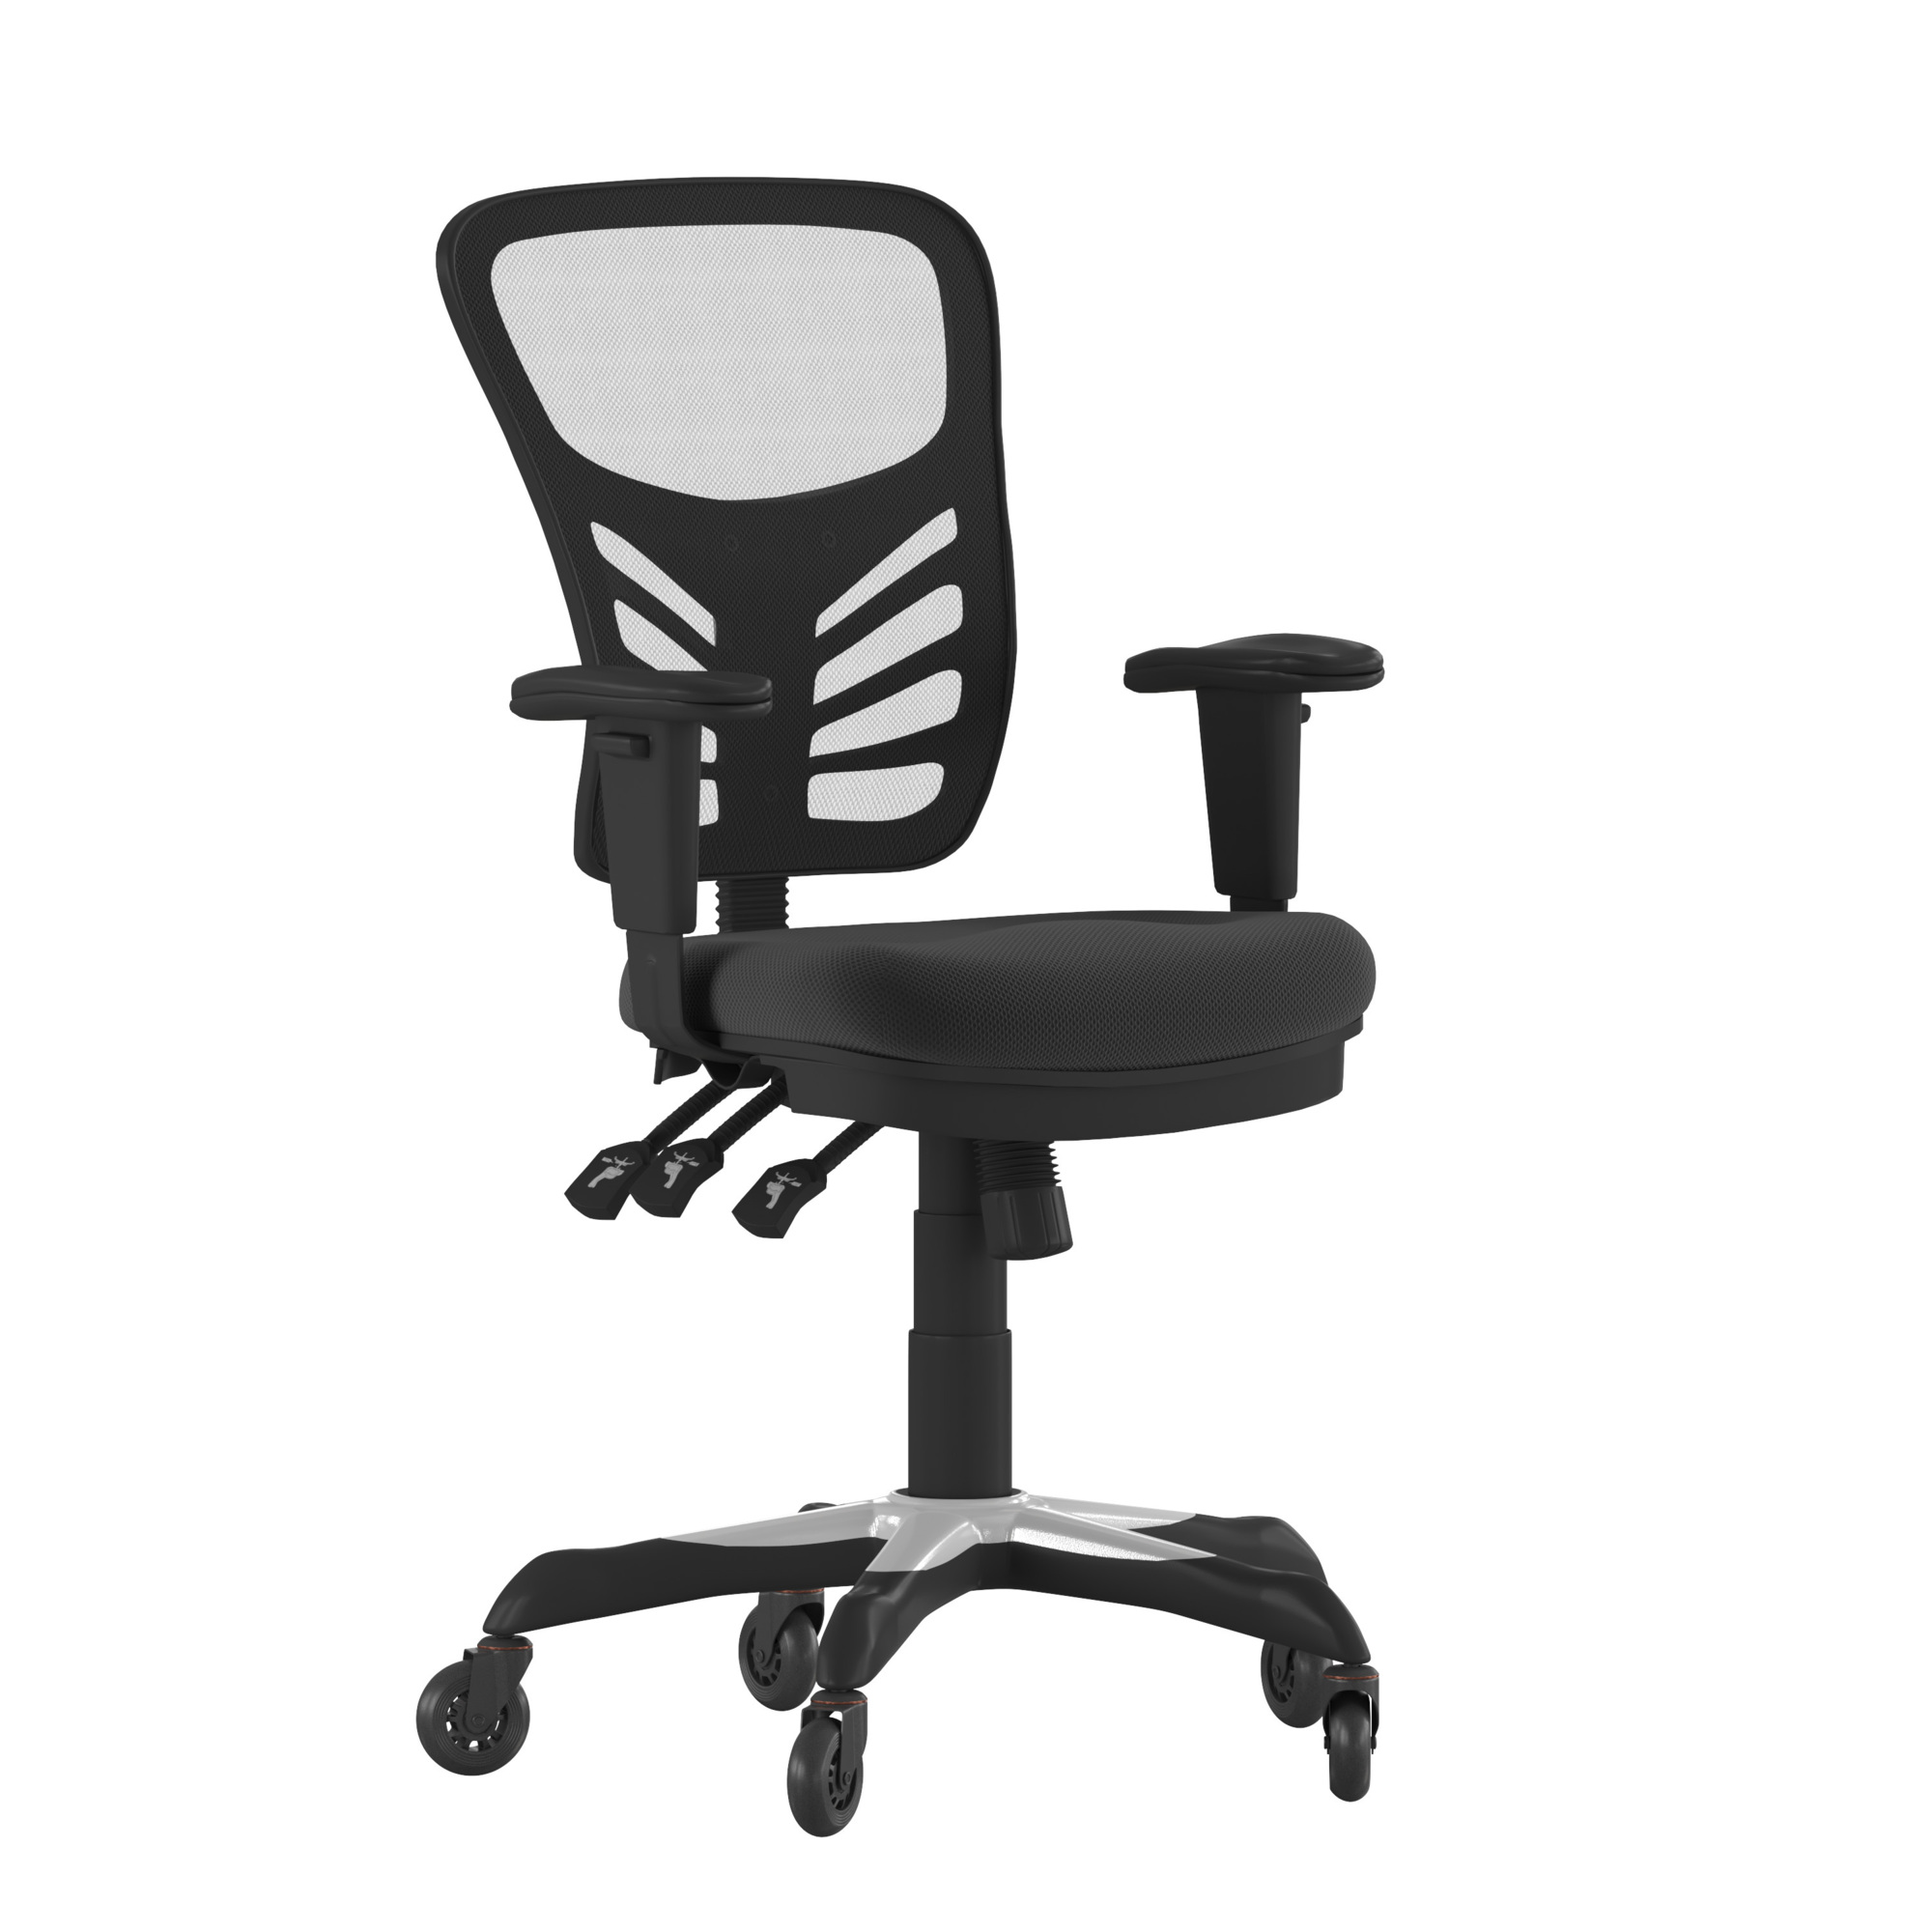 Flash Furniture, Black Mesh Multifunction Chair - Roller Wheels, Primary Color Black, Included (qty.) 2, Model HL0001RLB